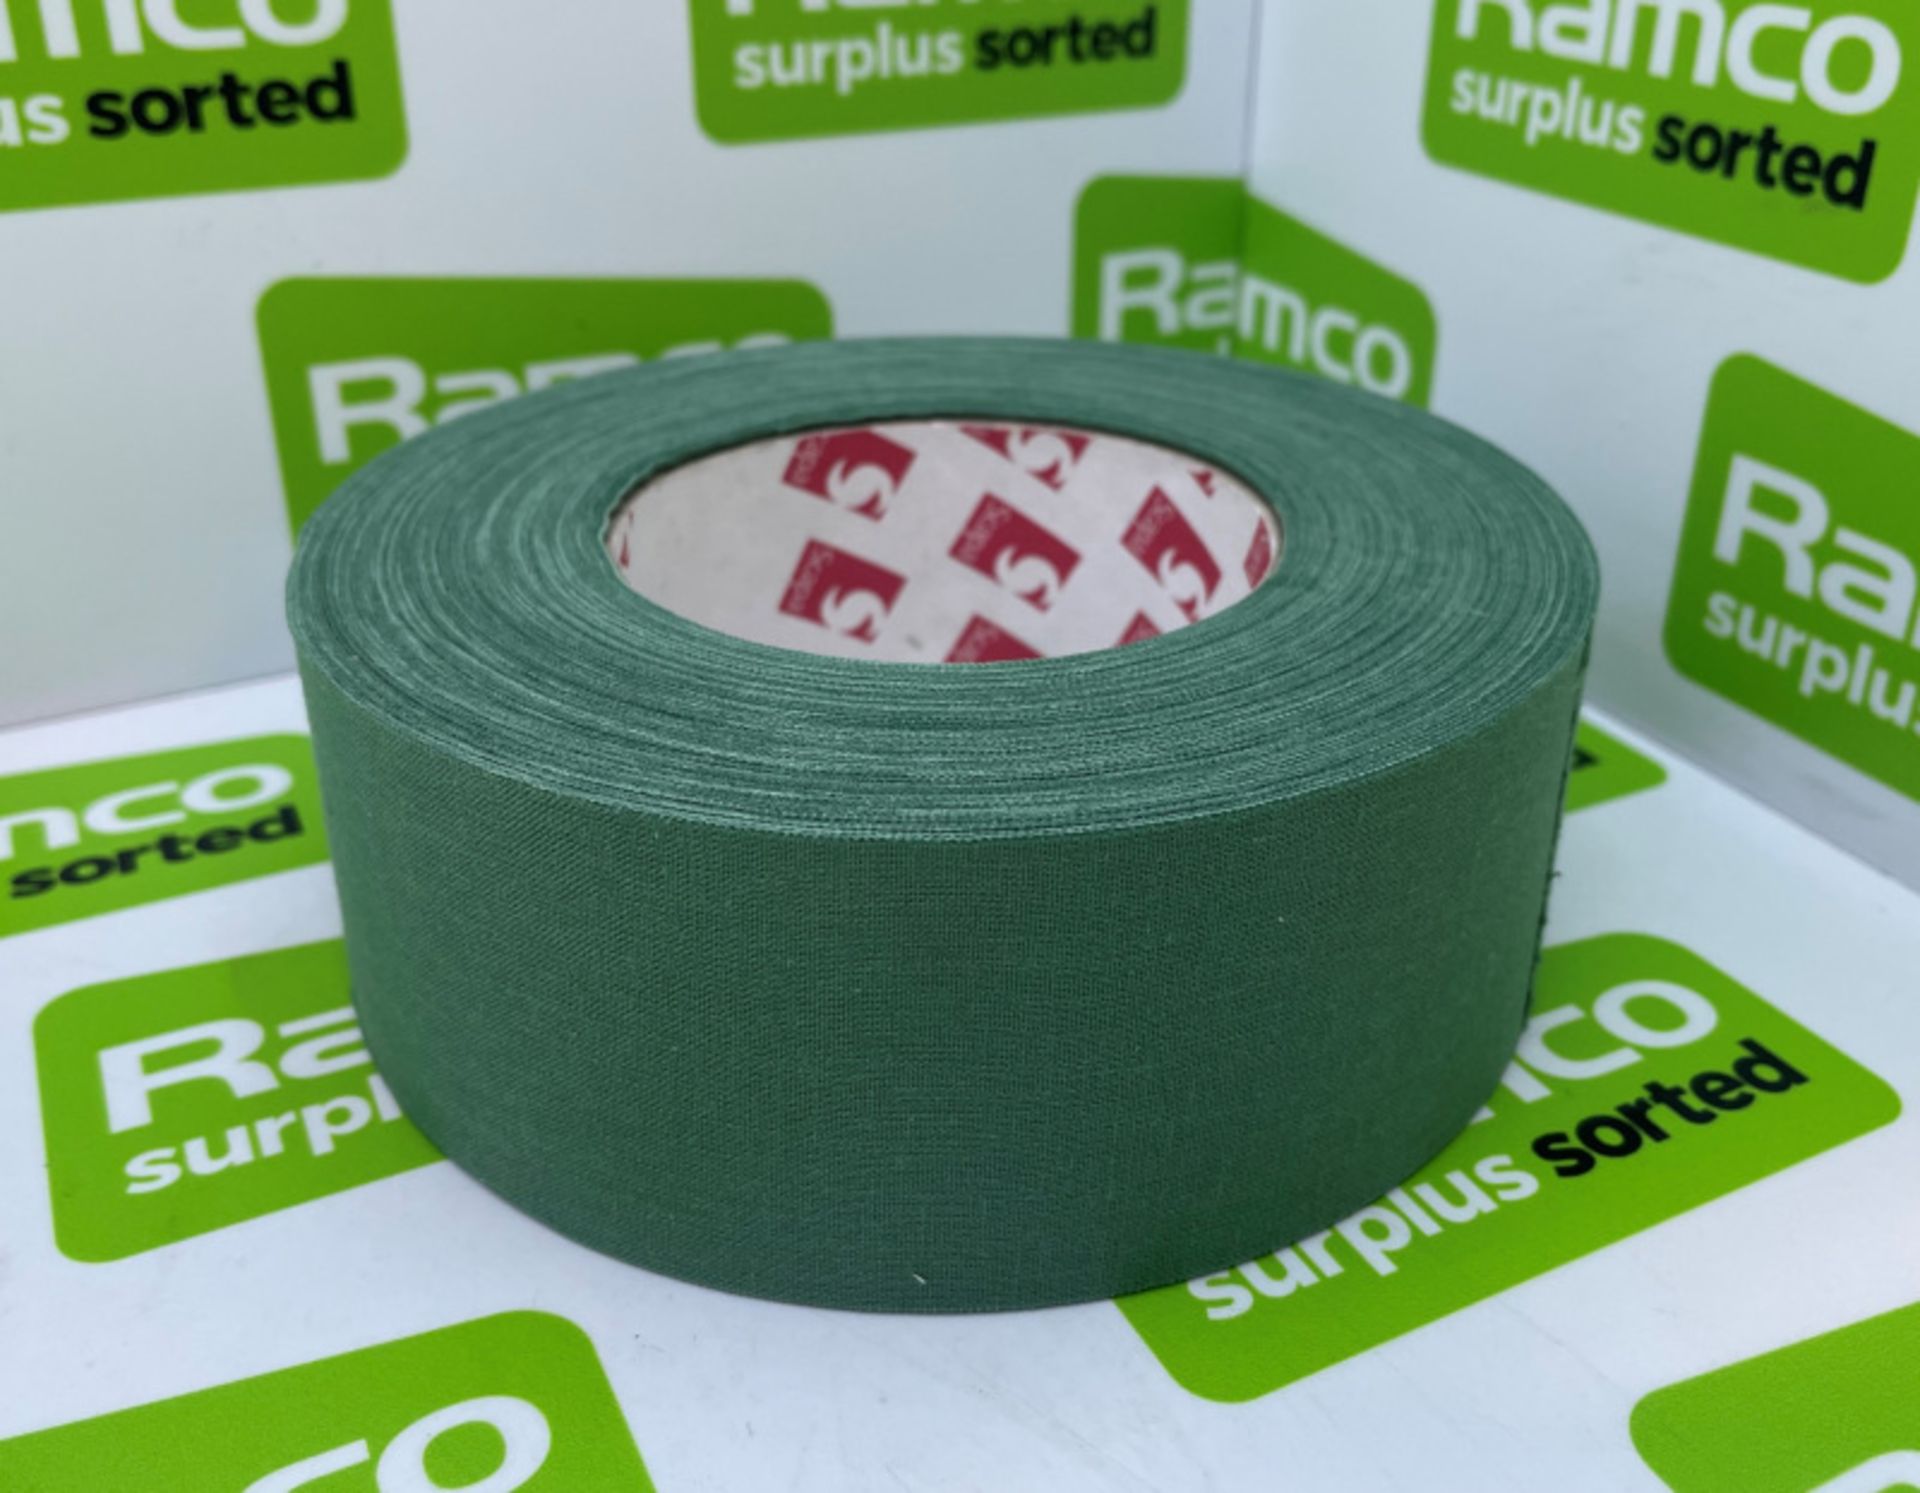 Scapa 3302 Pro Tape - Olive Green - 50mm x 50M rolls - 16 rolls per box - 33 boxes - Image 2 of 5